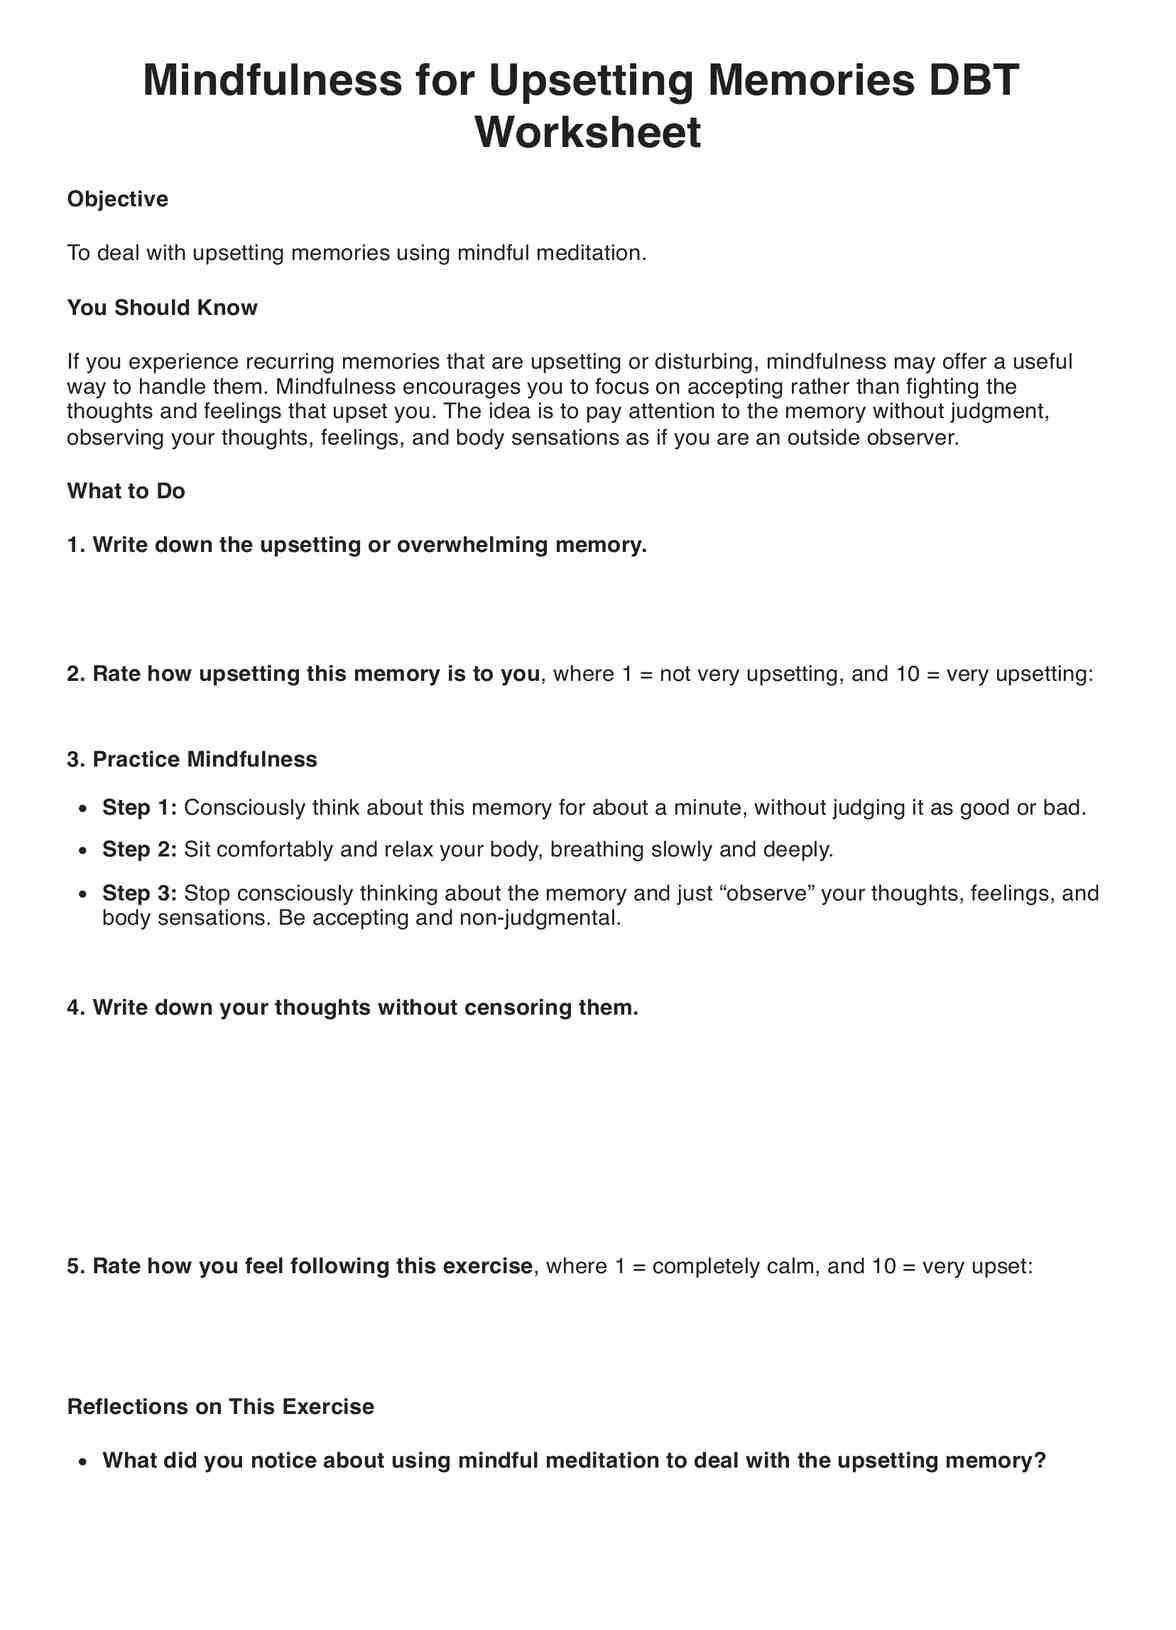 Mindfulness for Upsetting Memories DBT Worksheet PDF Example